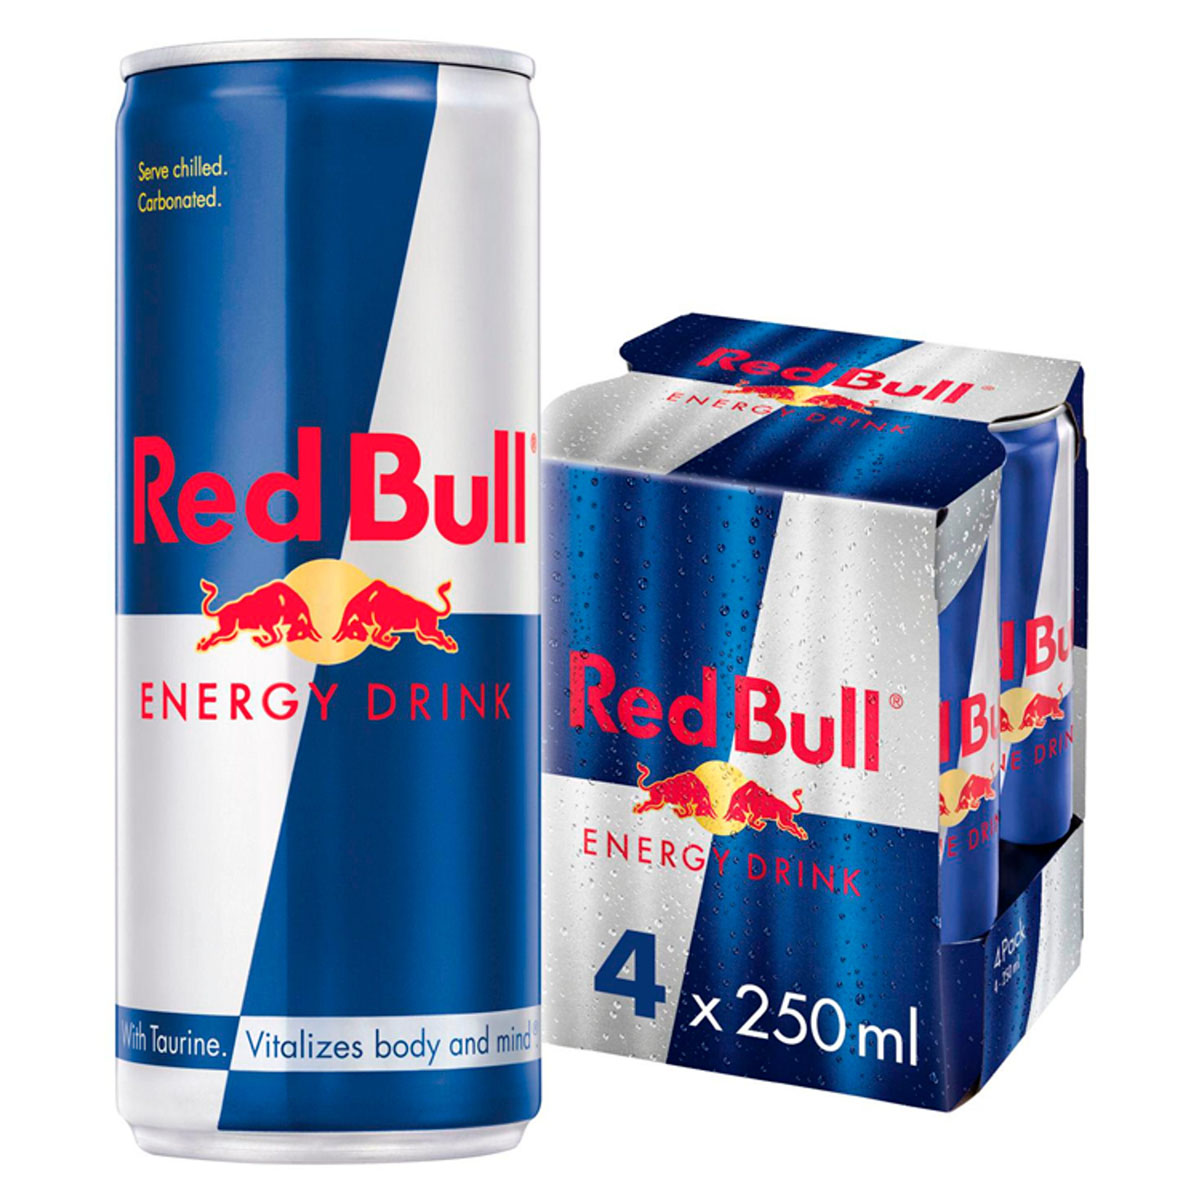 Red Bull Energy Drink Pack - 4x250ml in a box.